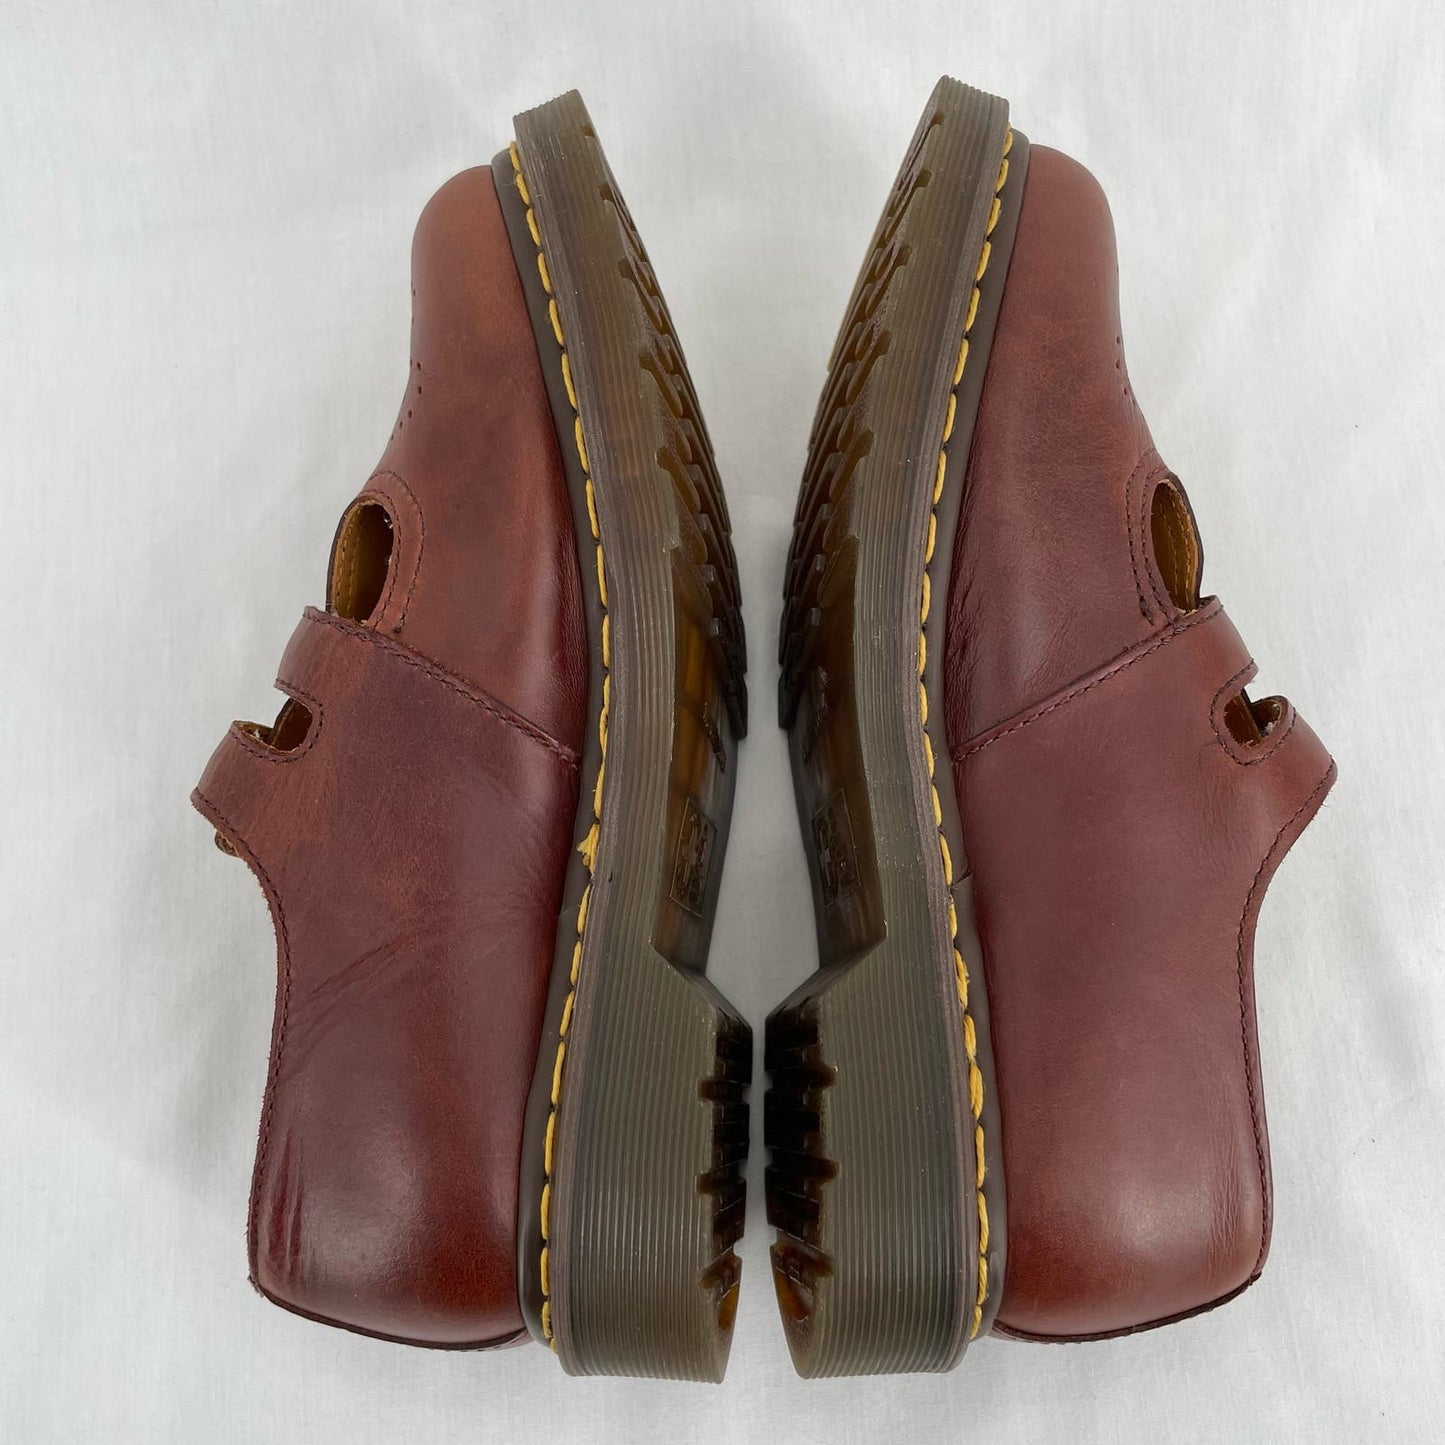 Dr. Martens Mary Jane Brown Smooth Leather Double Buckle Oxford Classic Shoes Size 8